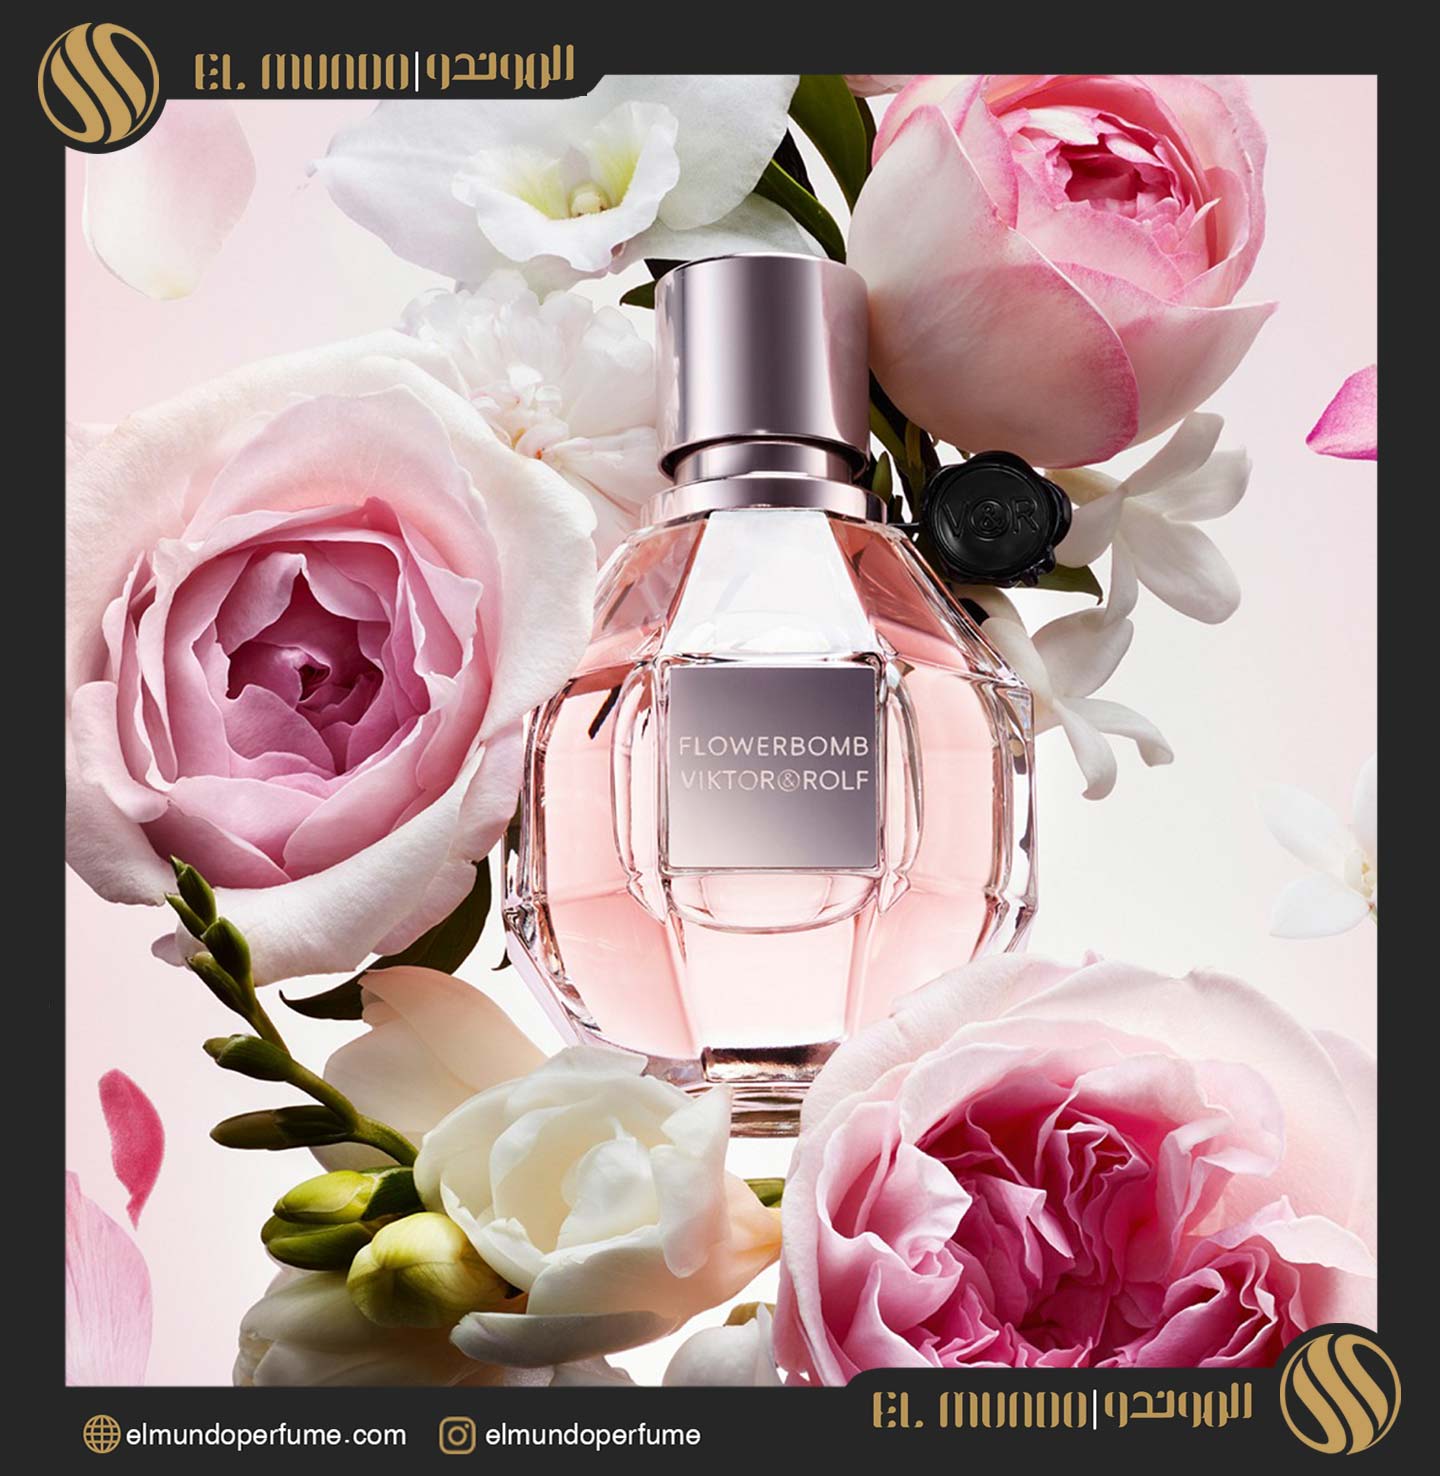 Flowerbomb Pearly Coral Pink Limited Edition ViktorRolf for women 2 - عطر ویکتور اند رالف فلاوربمب پرل پینک لیمیتد ادیشن